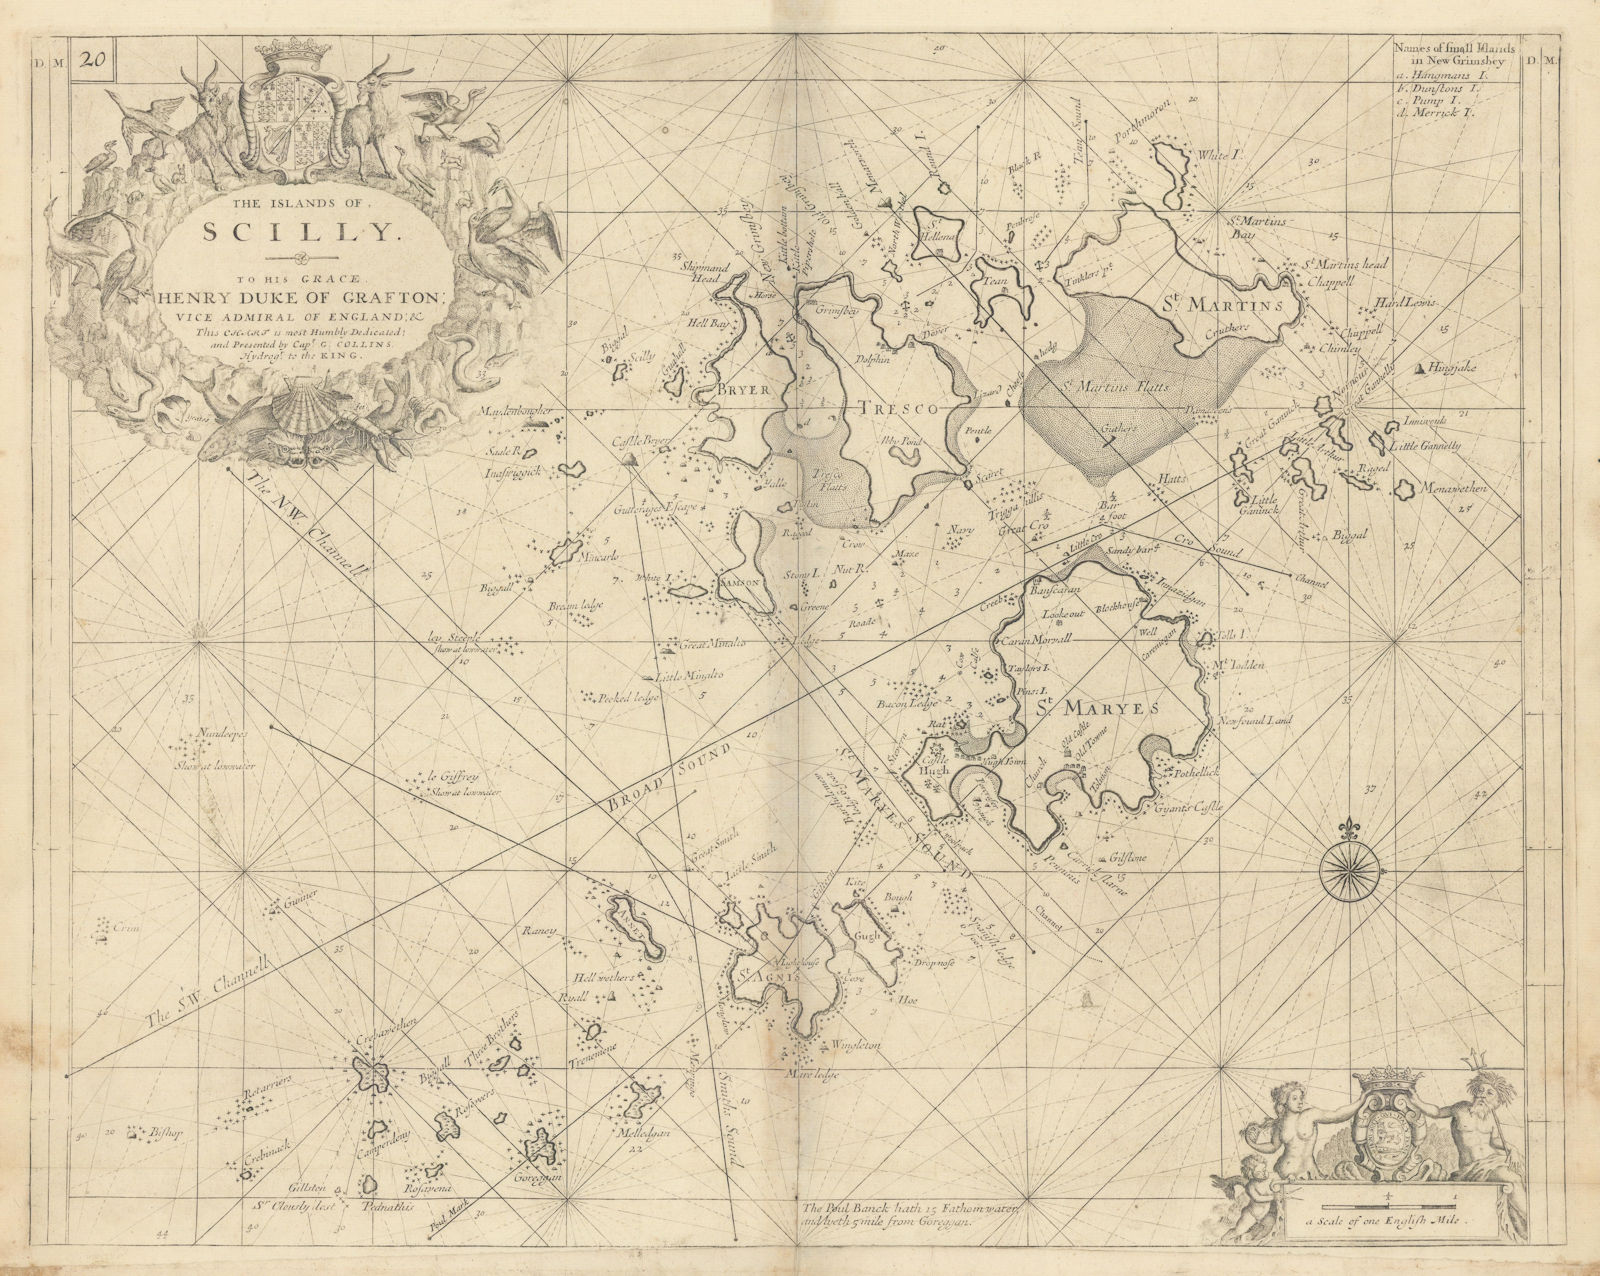 Associate Product THE ISLANDS OF SCILLY sea chart by Captain Greenvile. COLLINS 1723 old map